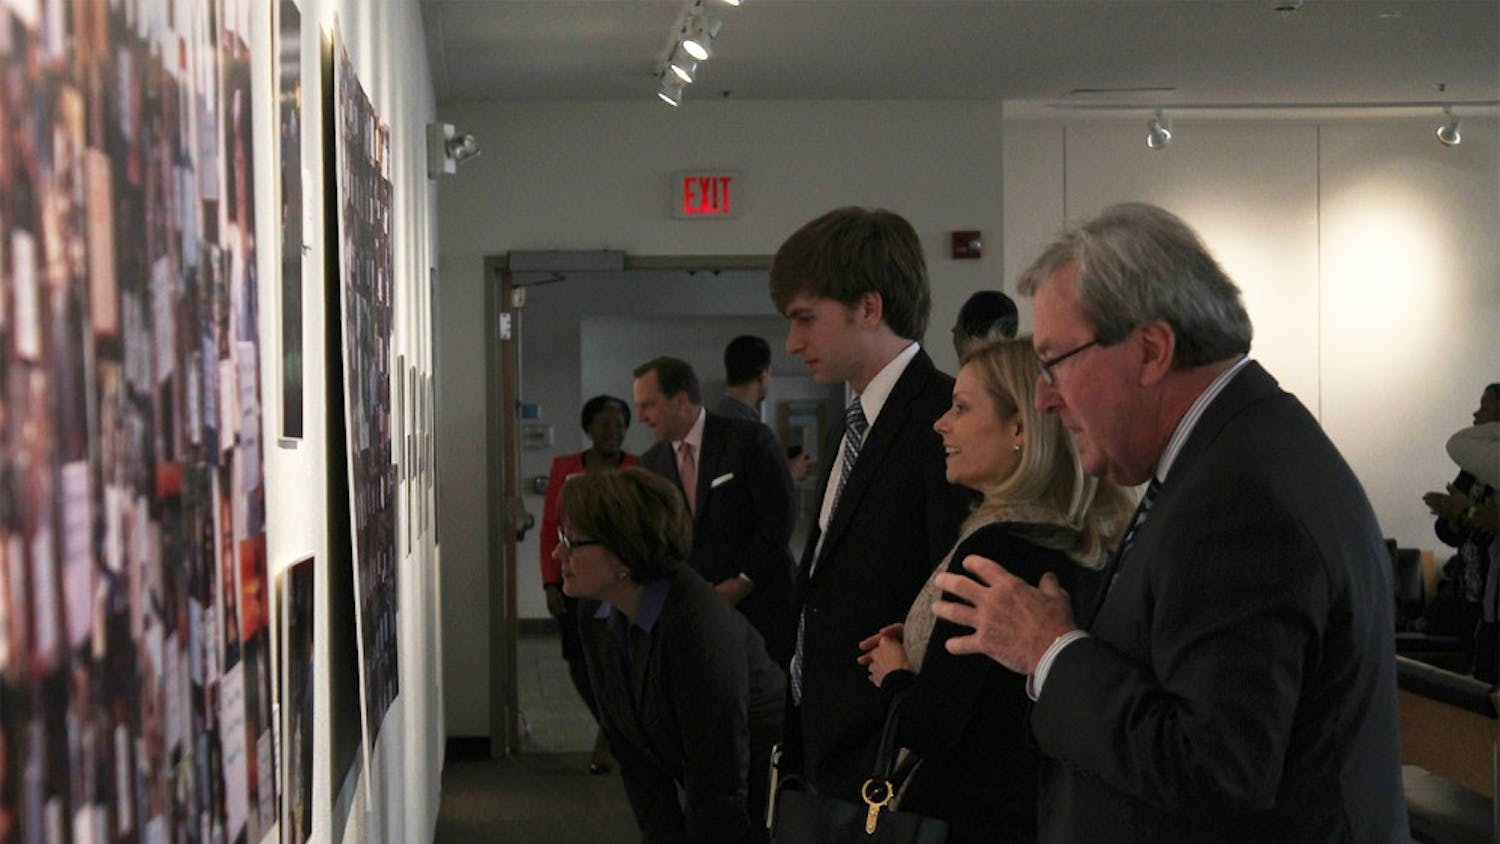 The Board of Trustees had a private viewing of the “I Have A Dream UNC Exhibit” in the Student Union Art Gallery Wednesday.